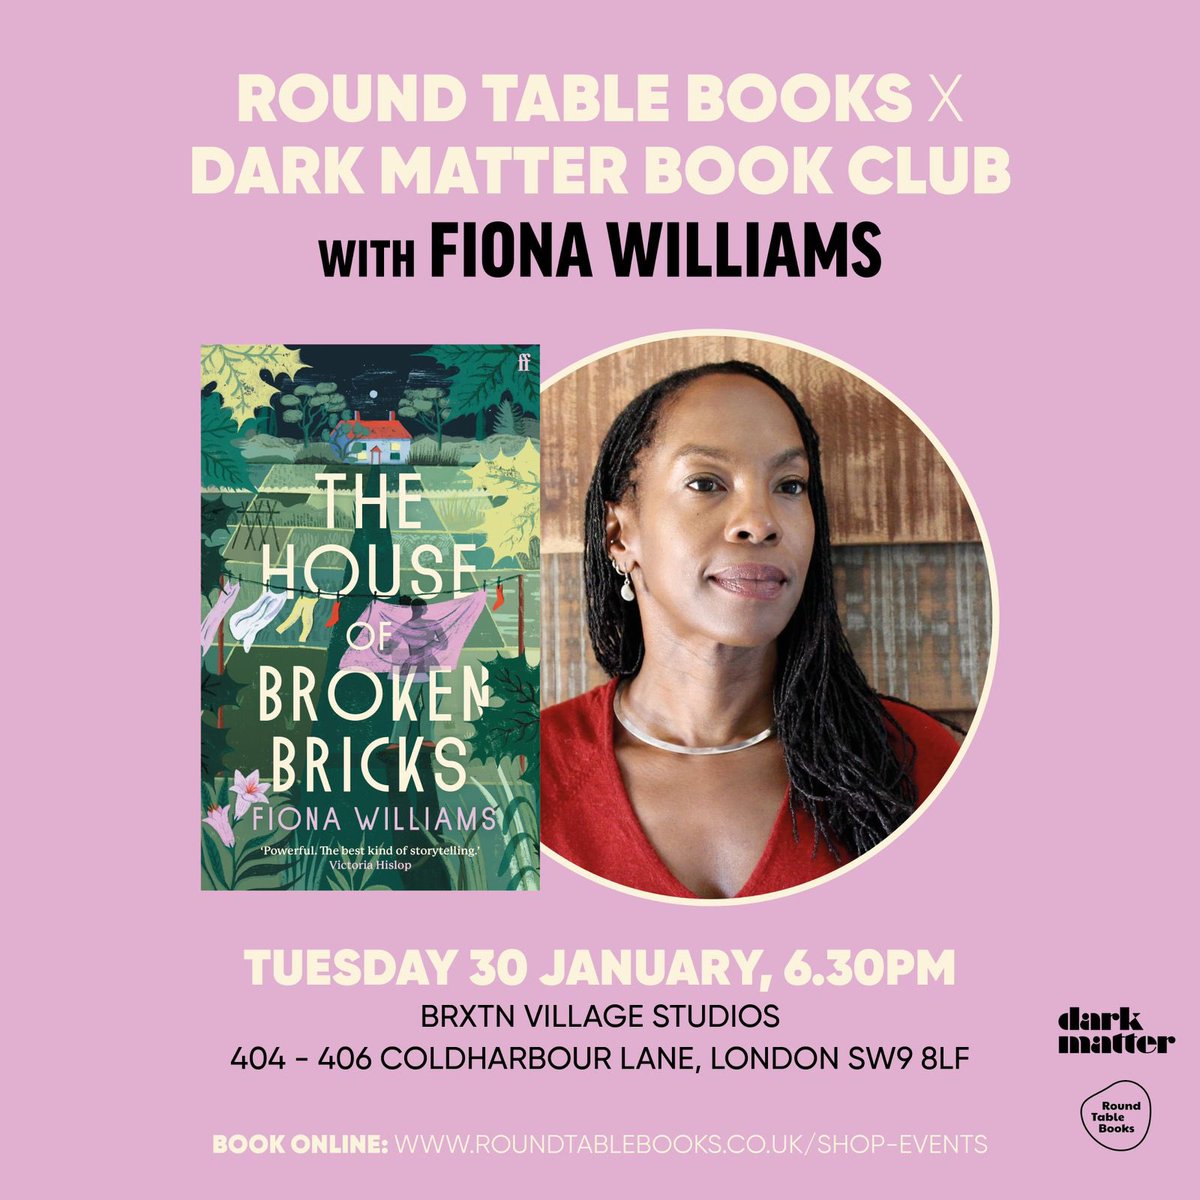 Our first book club read of 2024 - THE HOUSE OF BROKEN BRICKS with author Fiona Williams joining us in person! 📍Tue 30 Jan, 6.30pm @BrixtonVillage Studios 🎟️ bit.ly/3ttu7YF **EXCLUSIVE** The book is out on Jan 18 but you can grab your early copy now from @BooksRound